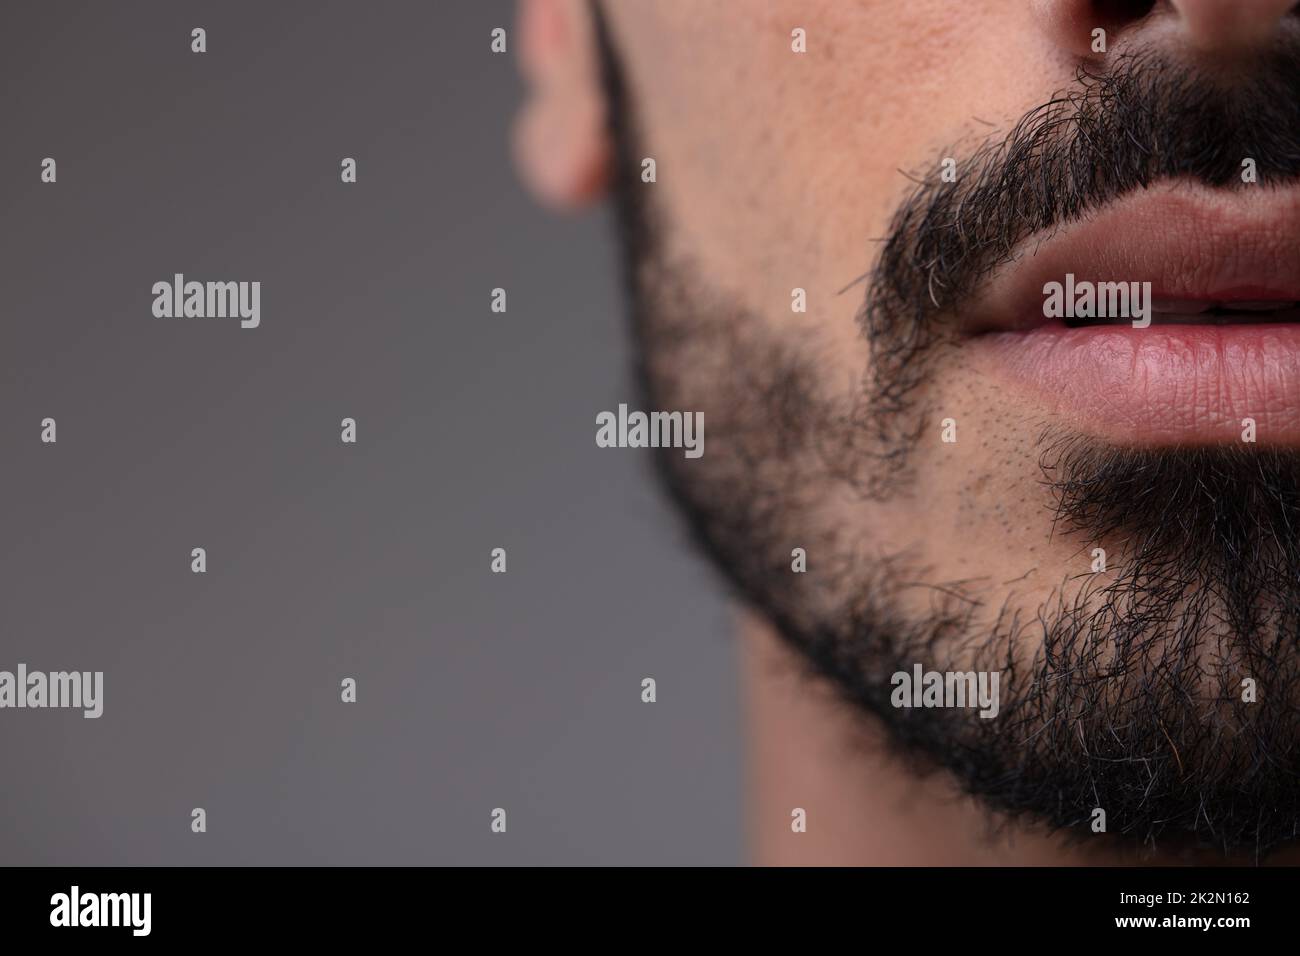 Cropped view of the mouth of a bearded man Stock Photo